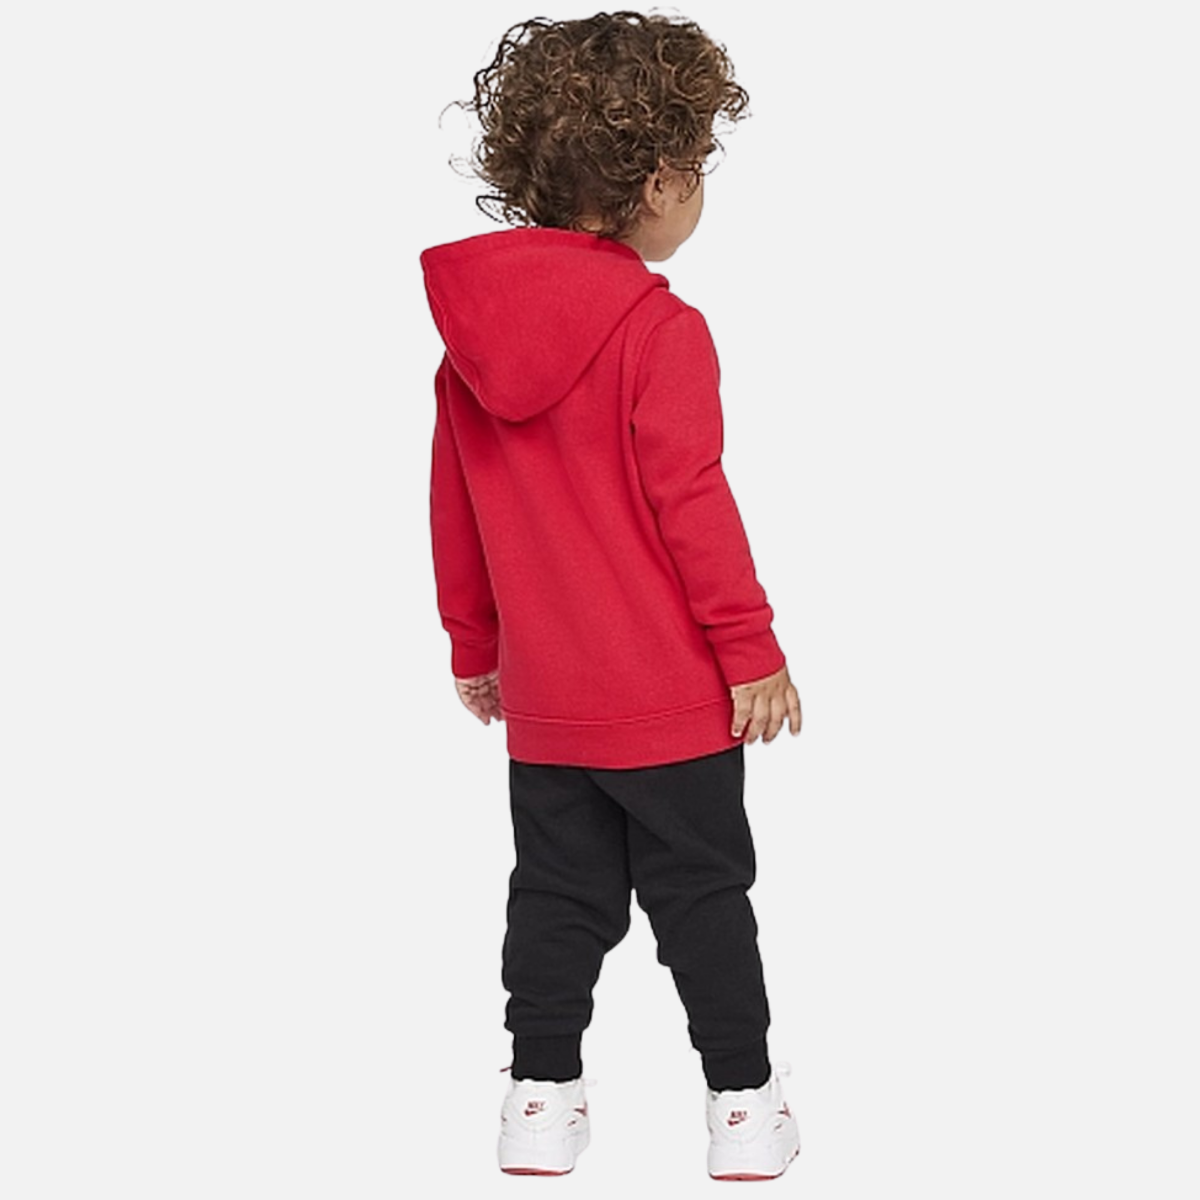 Nike Baby Just do It Tracksuit Set - Red/Black